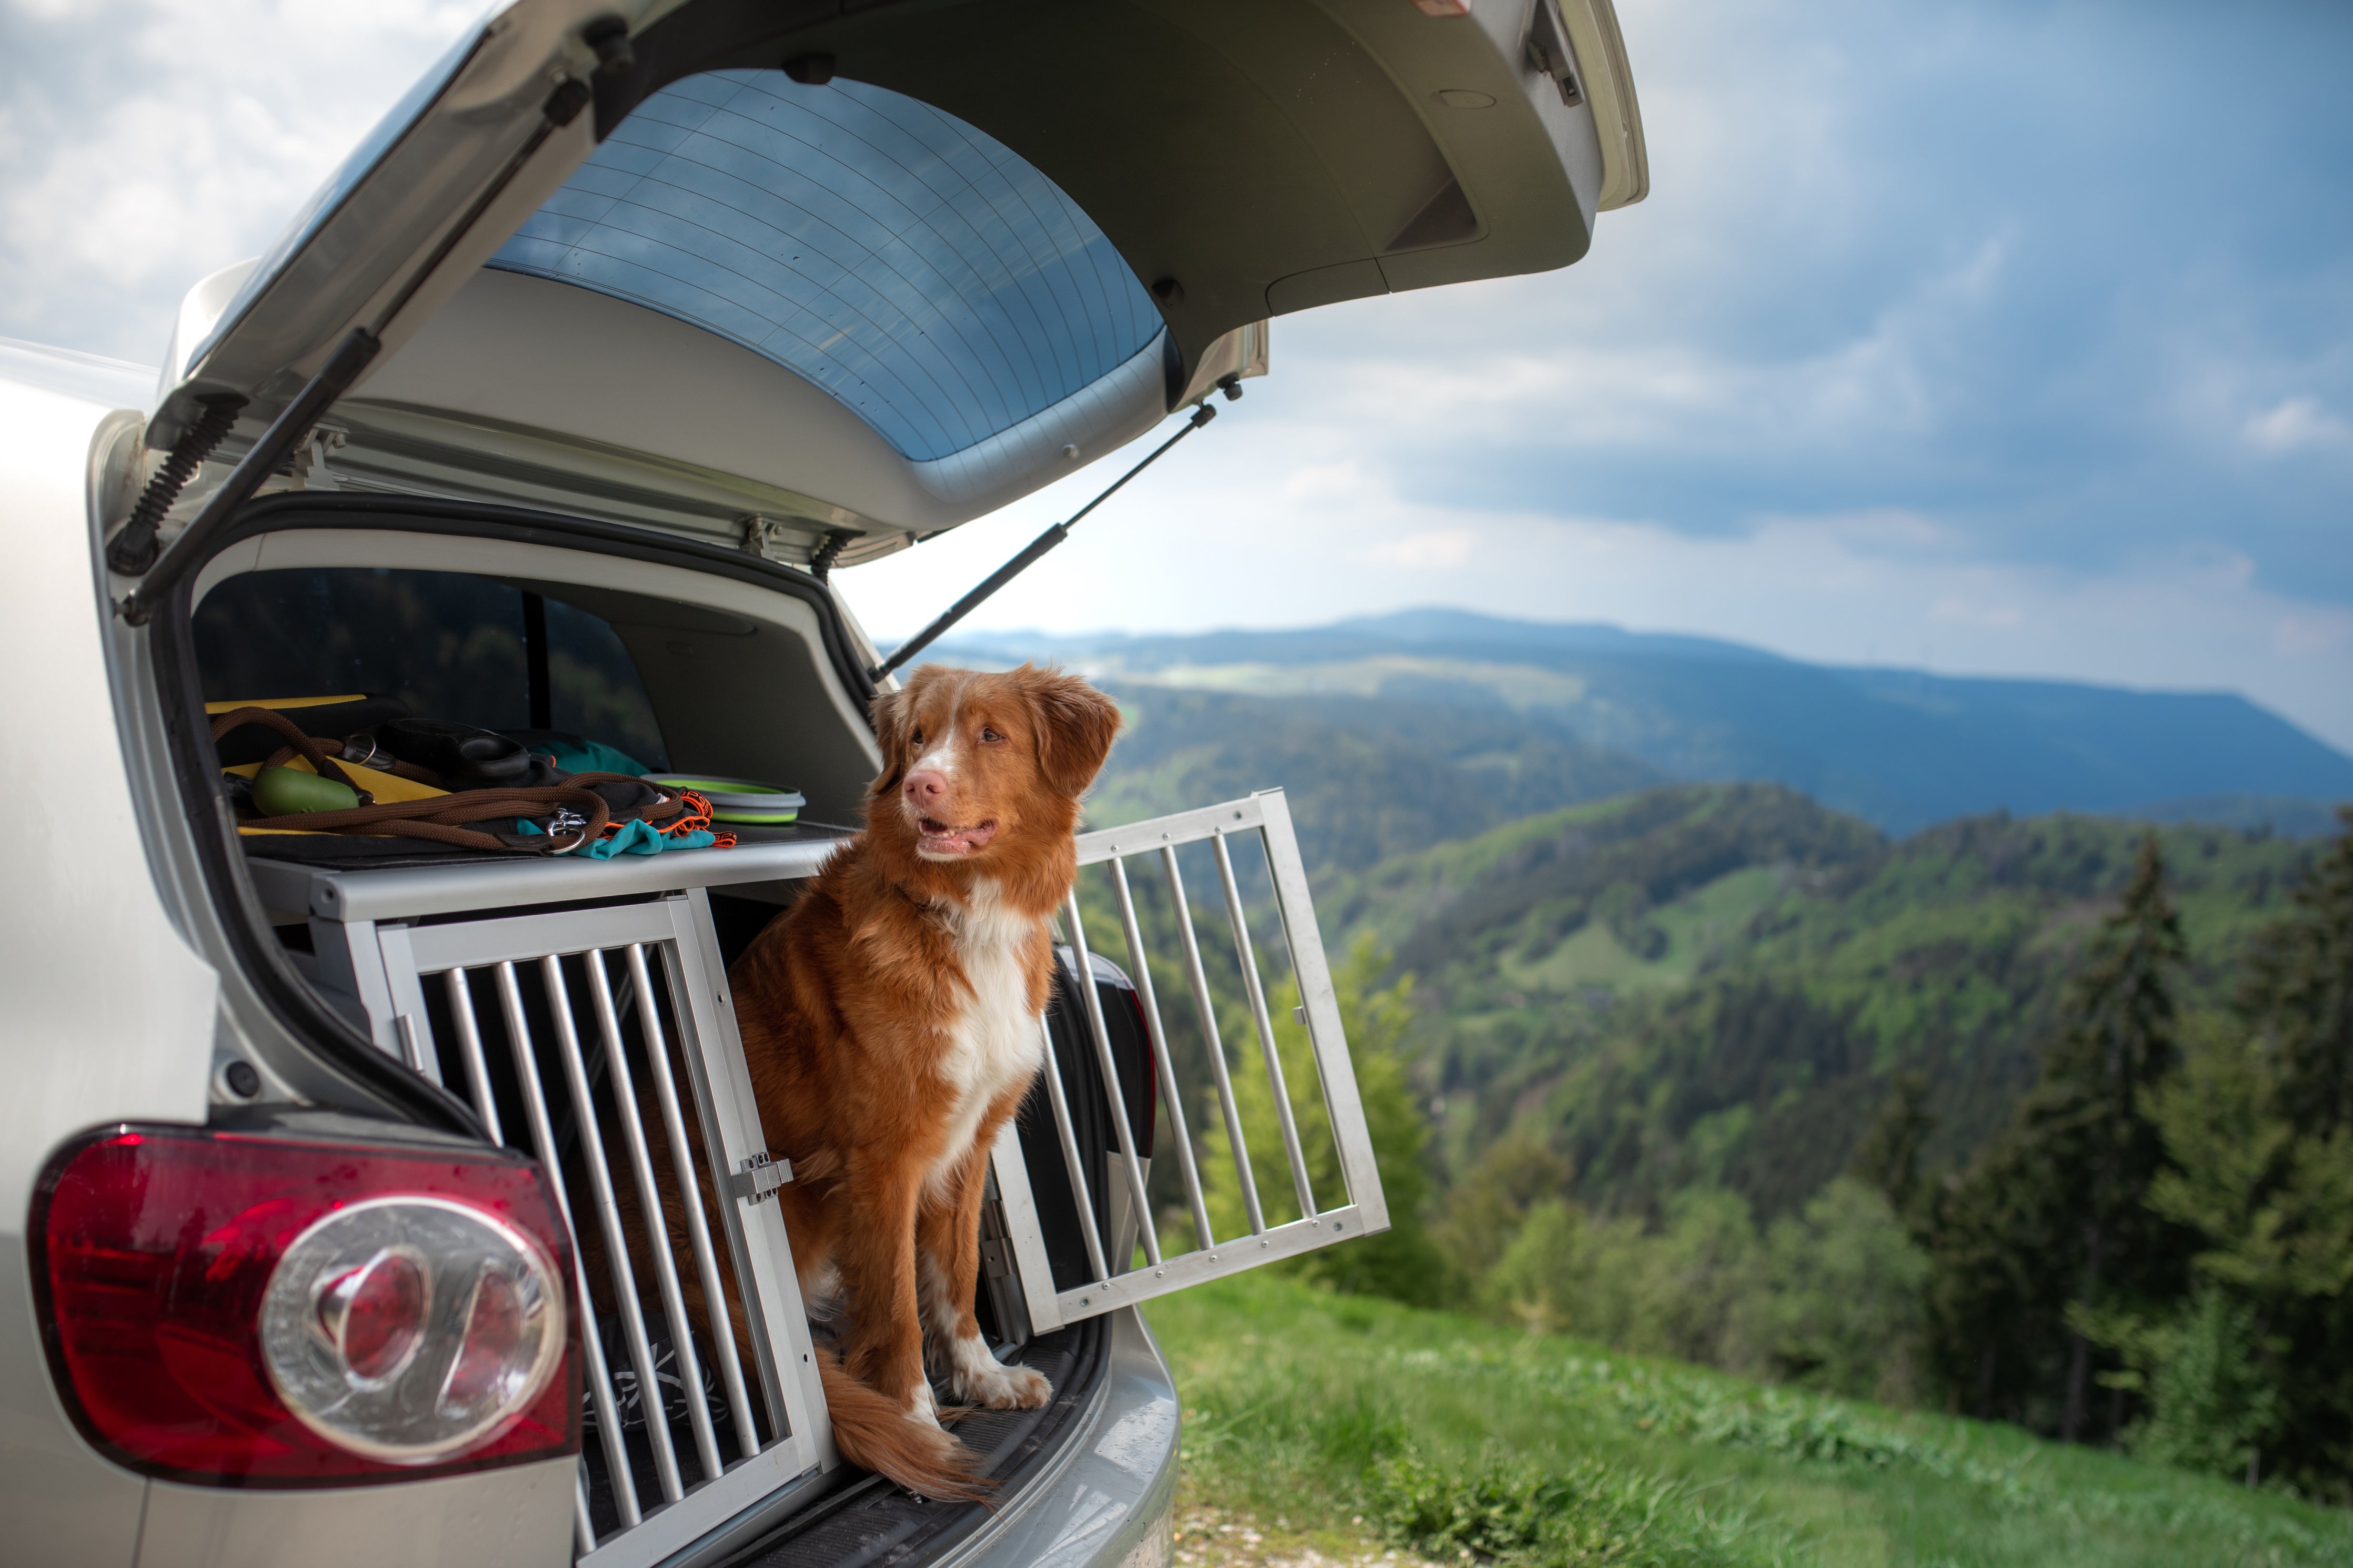 How to settle your dog on a staycation